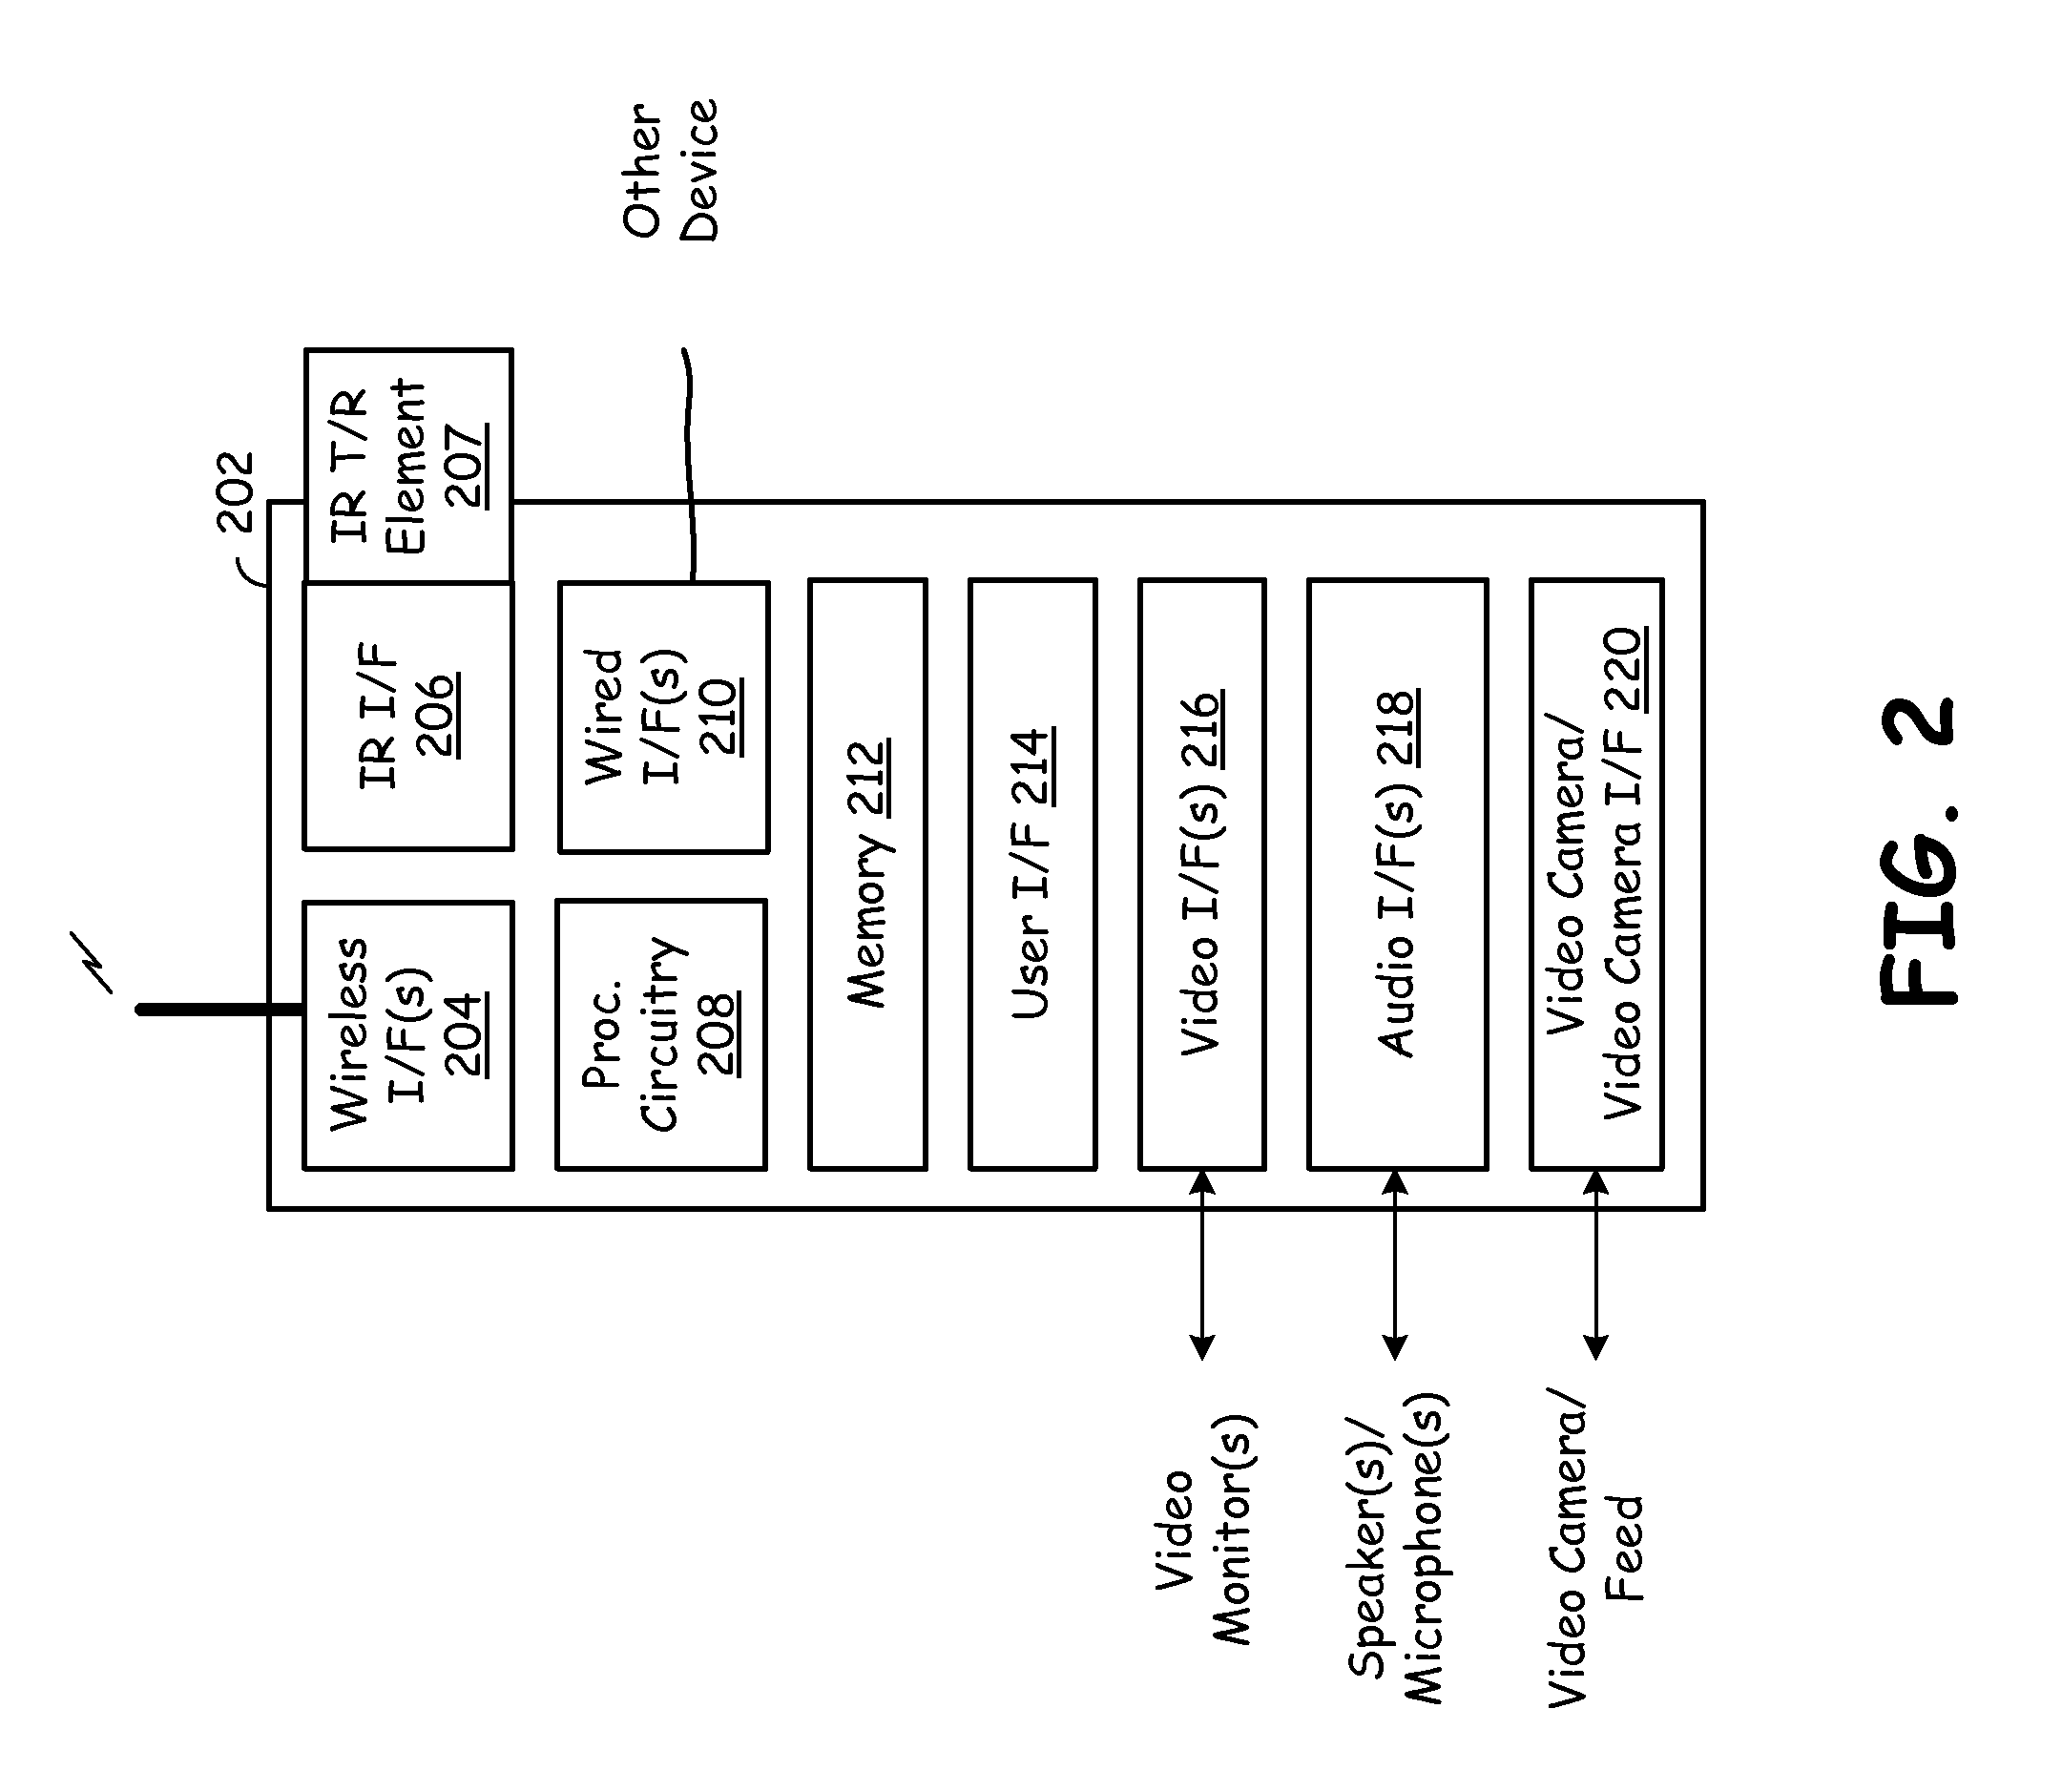 Remote control for multimedia system having touch sensitive panel for user id